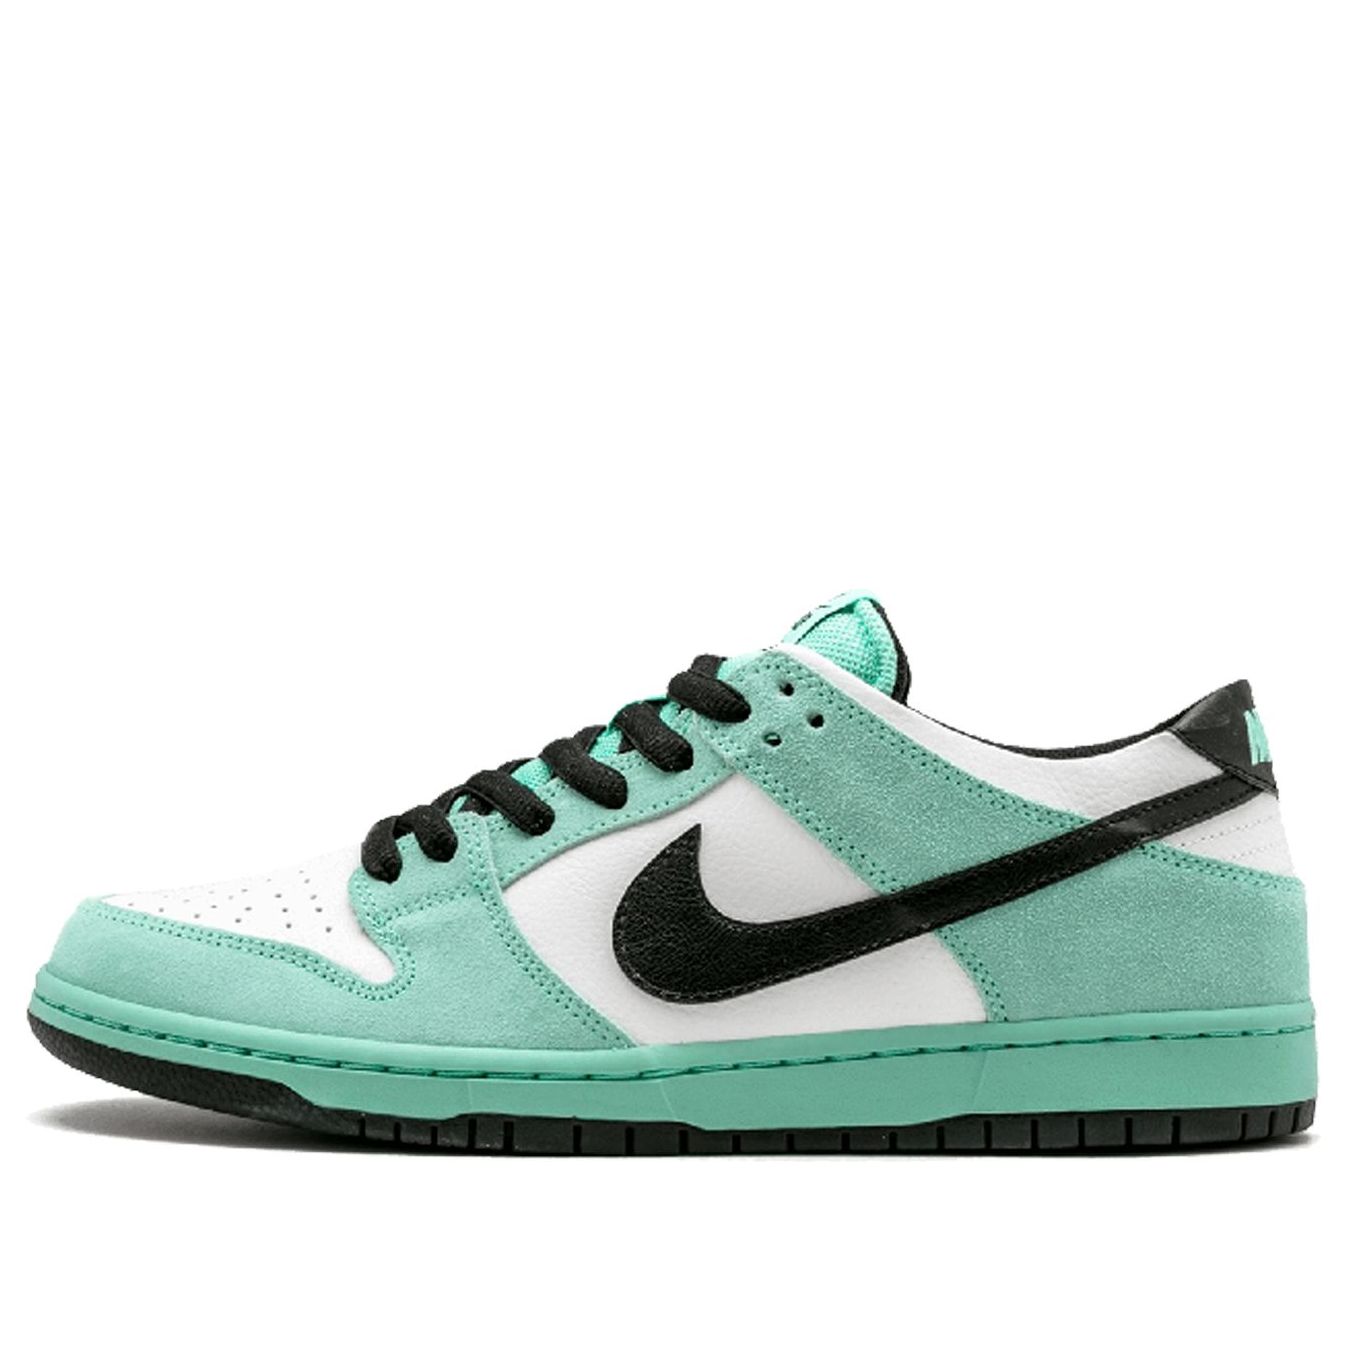 Nike SB Dunk Low 'Sea Crystal'  819674-301 Antique Icons